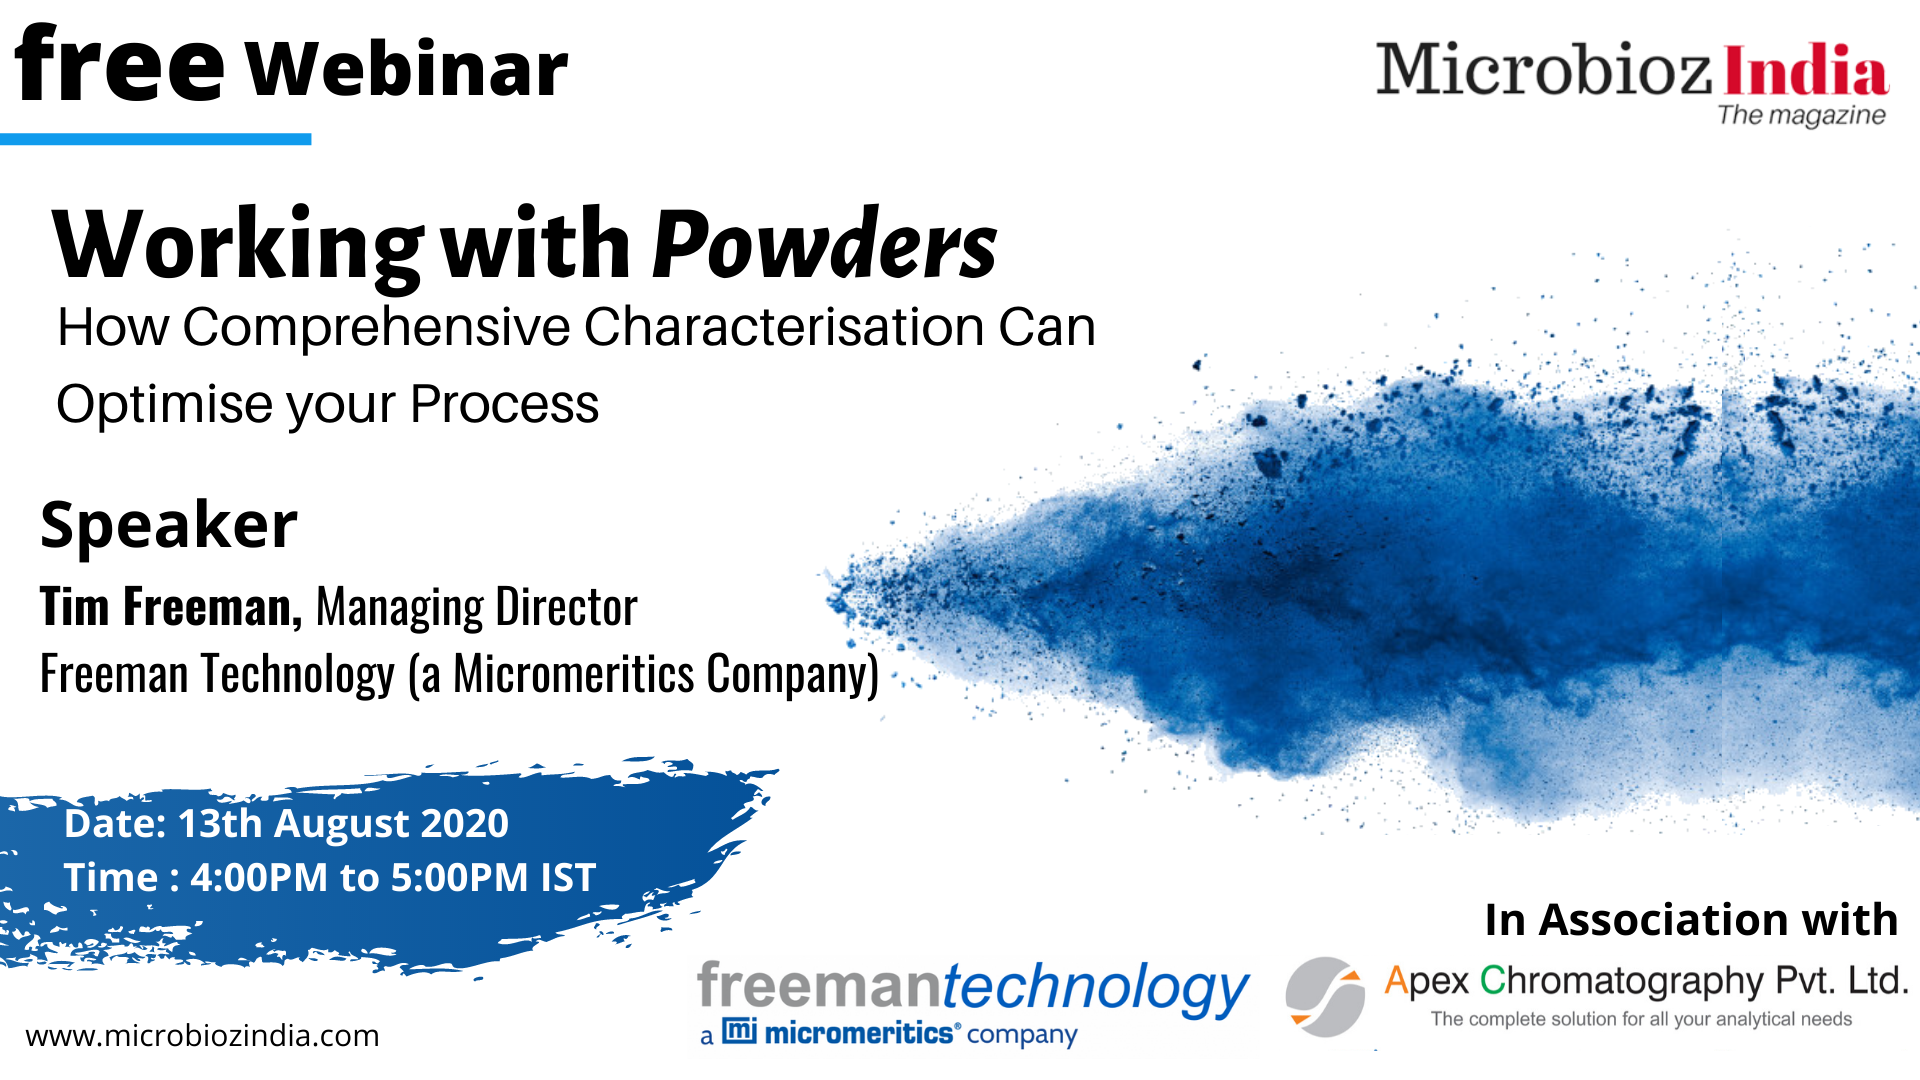 Join our distributors Apex Chromatography for a working with powders webinar